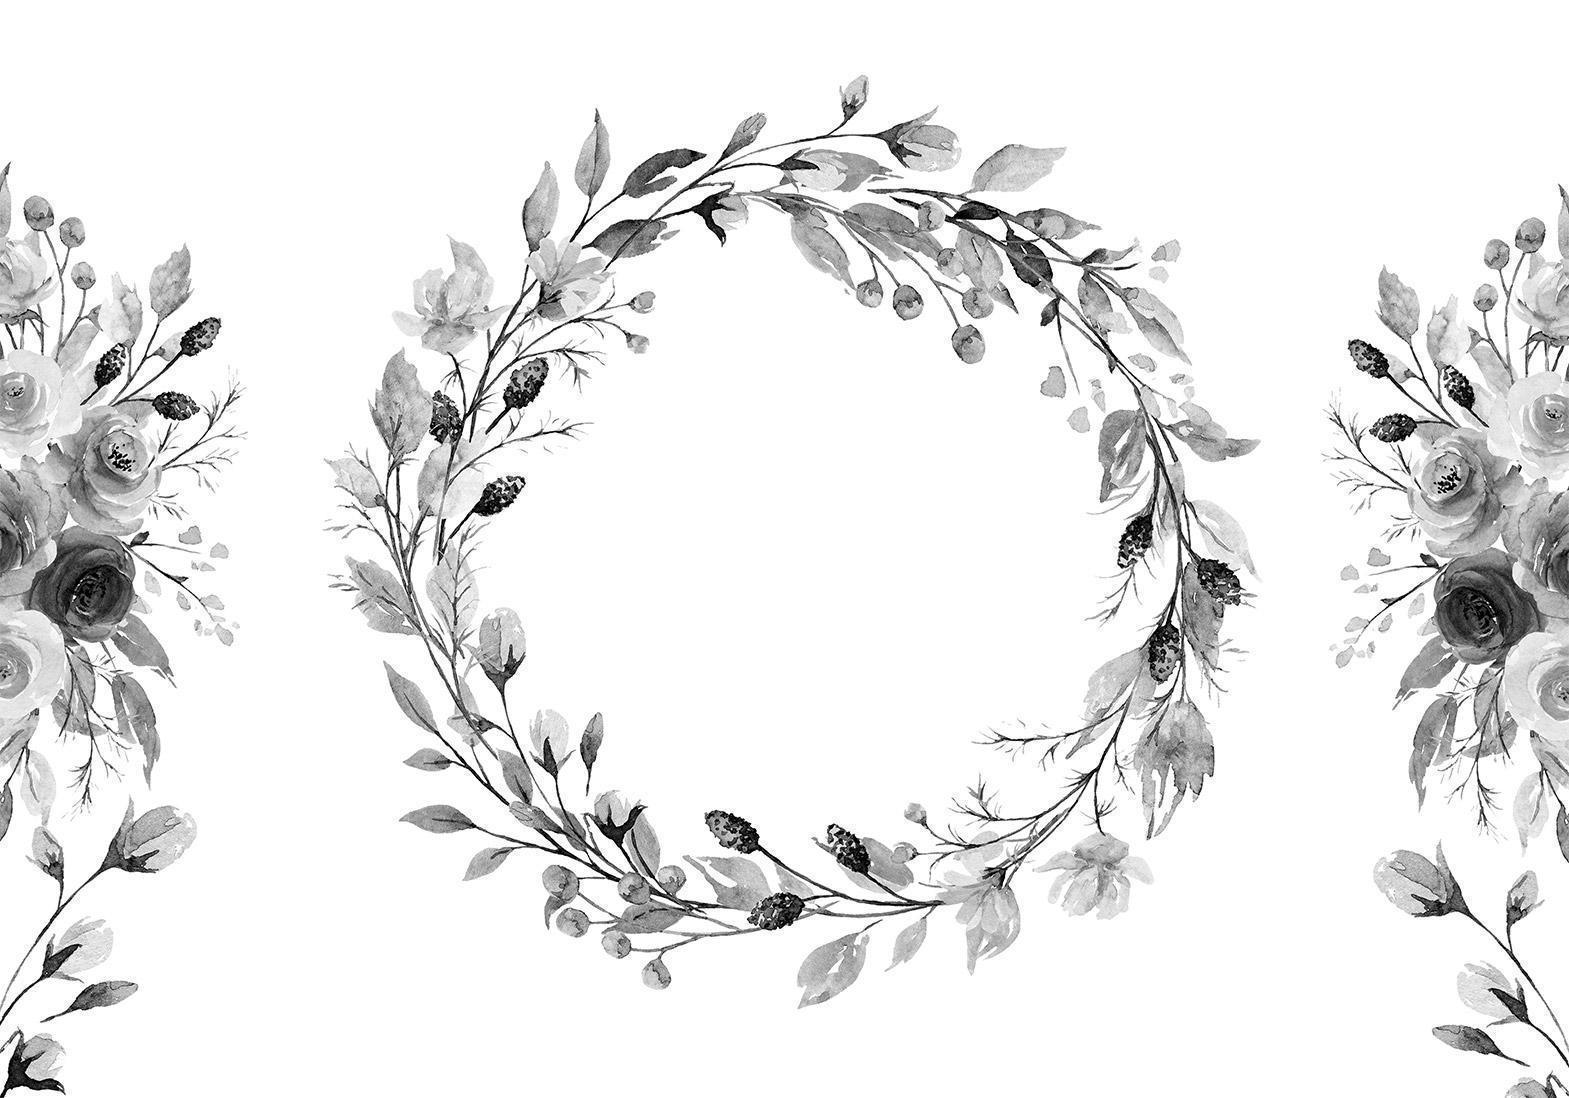 Papier peint - Romantic wreath - grey plant motif with leaves with rose pattern